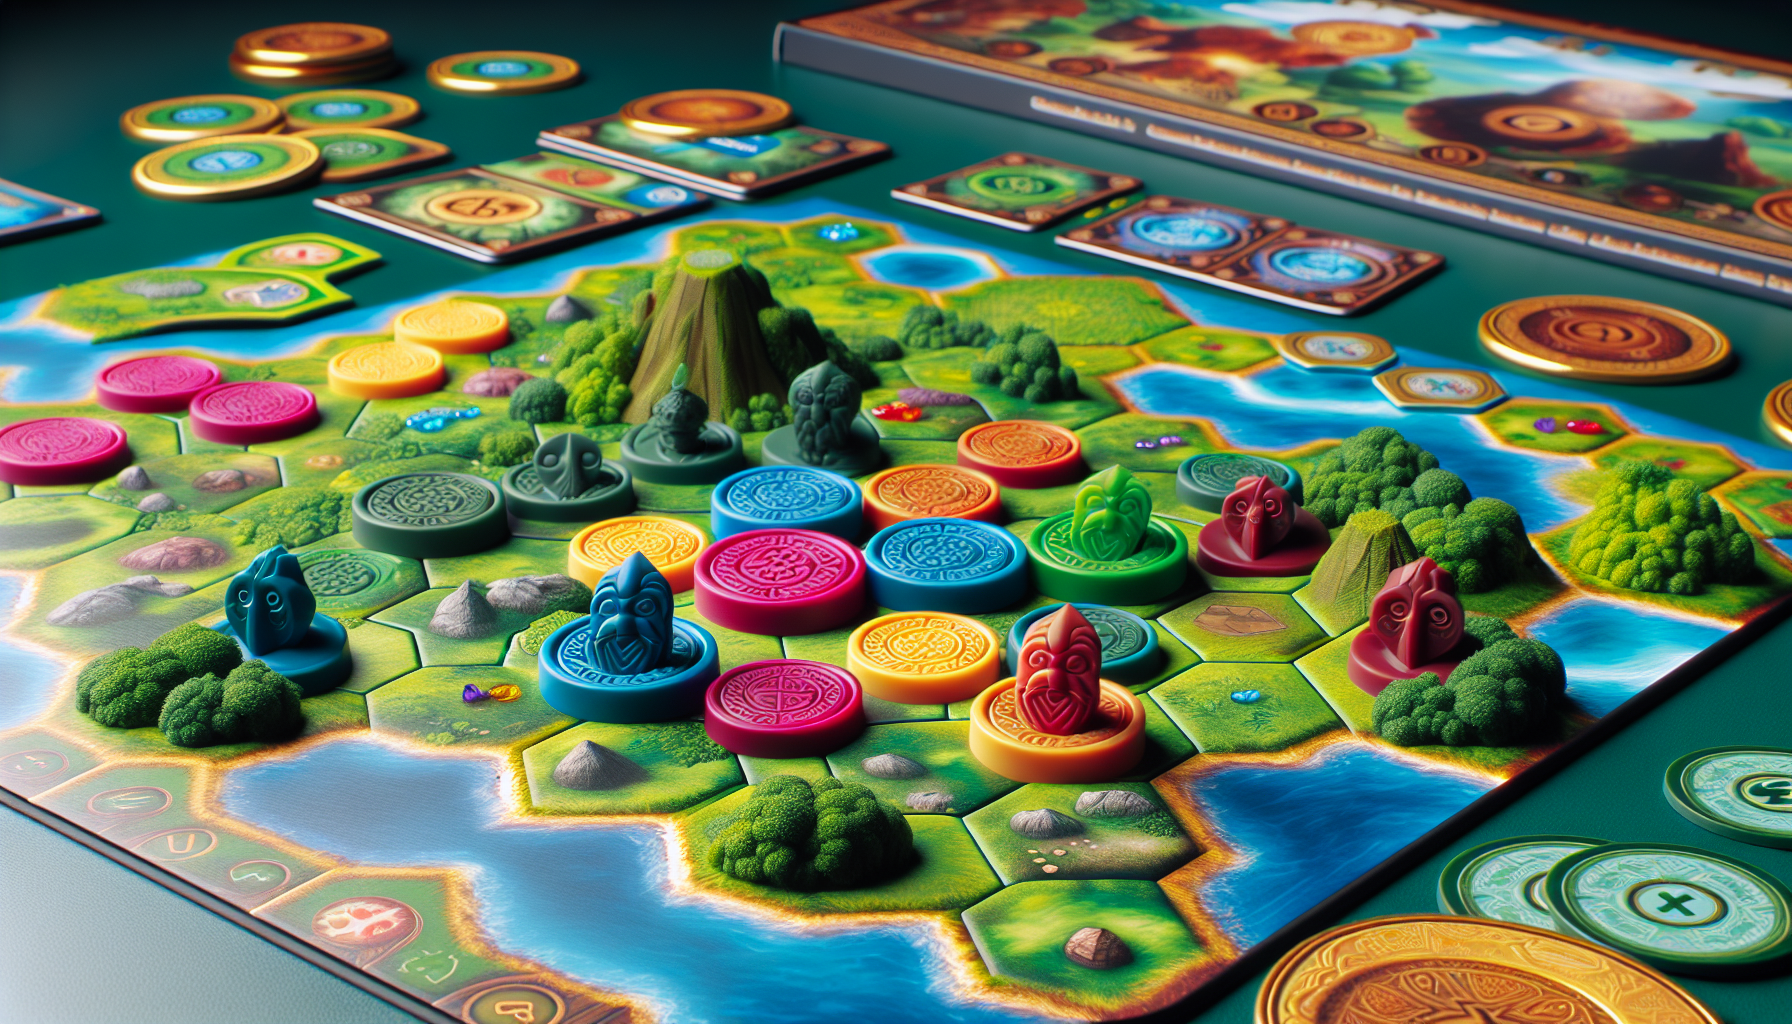 Strategy game enhancements for popular board games